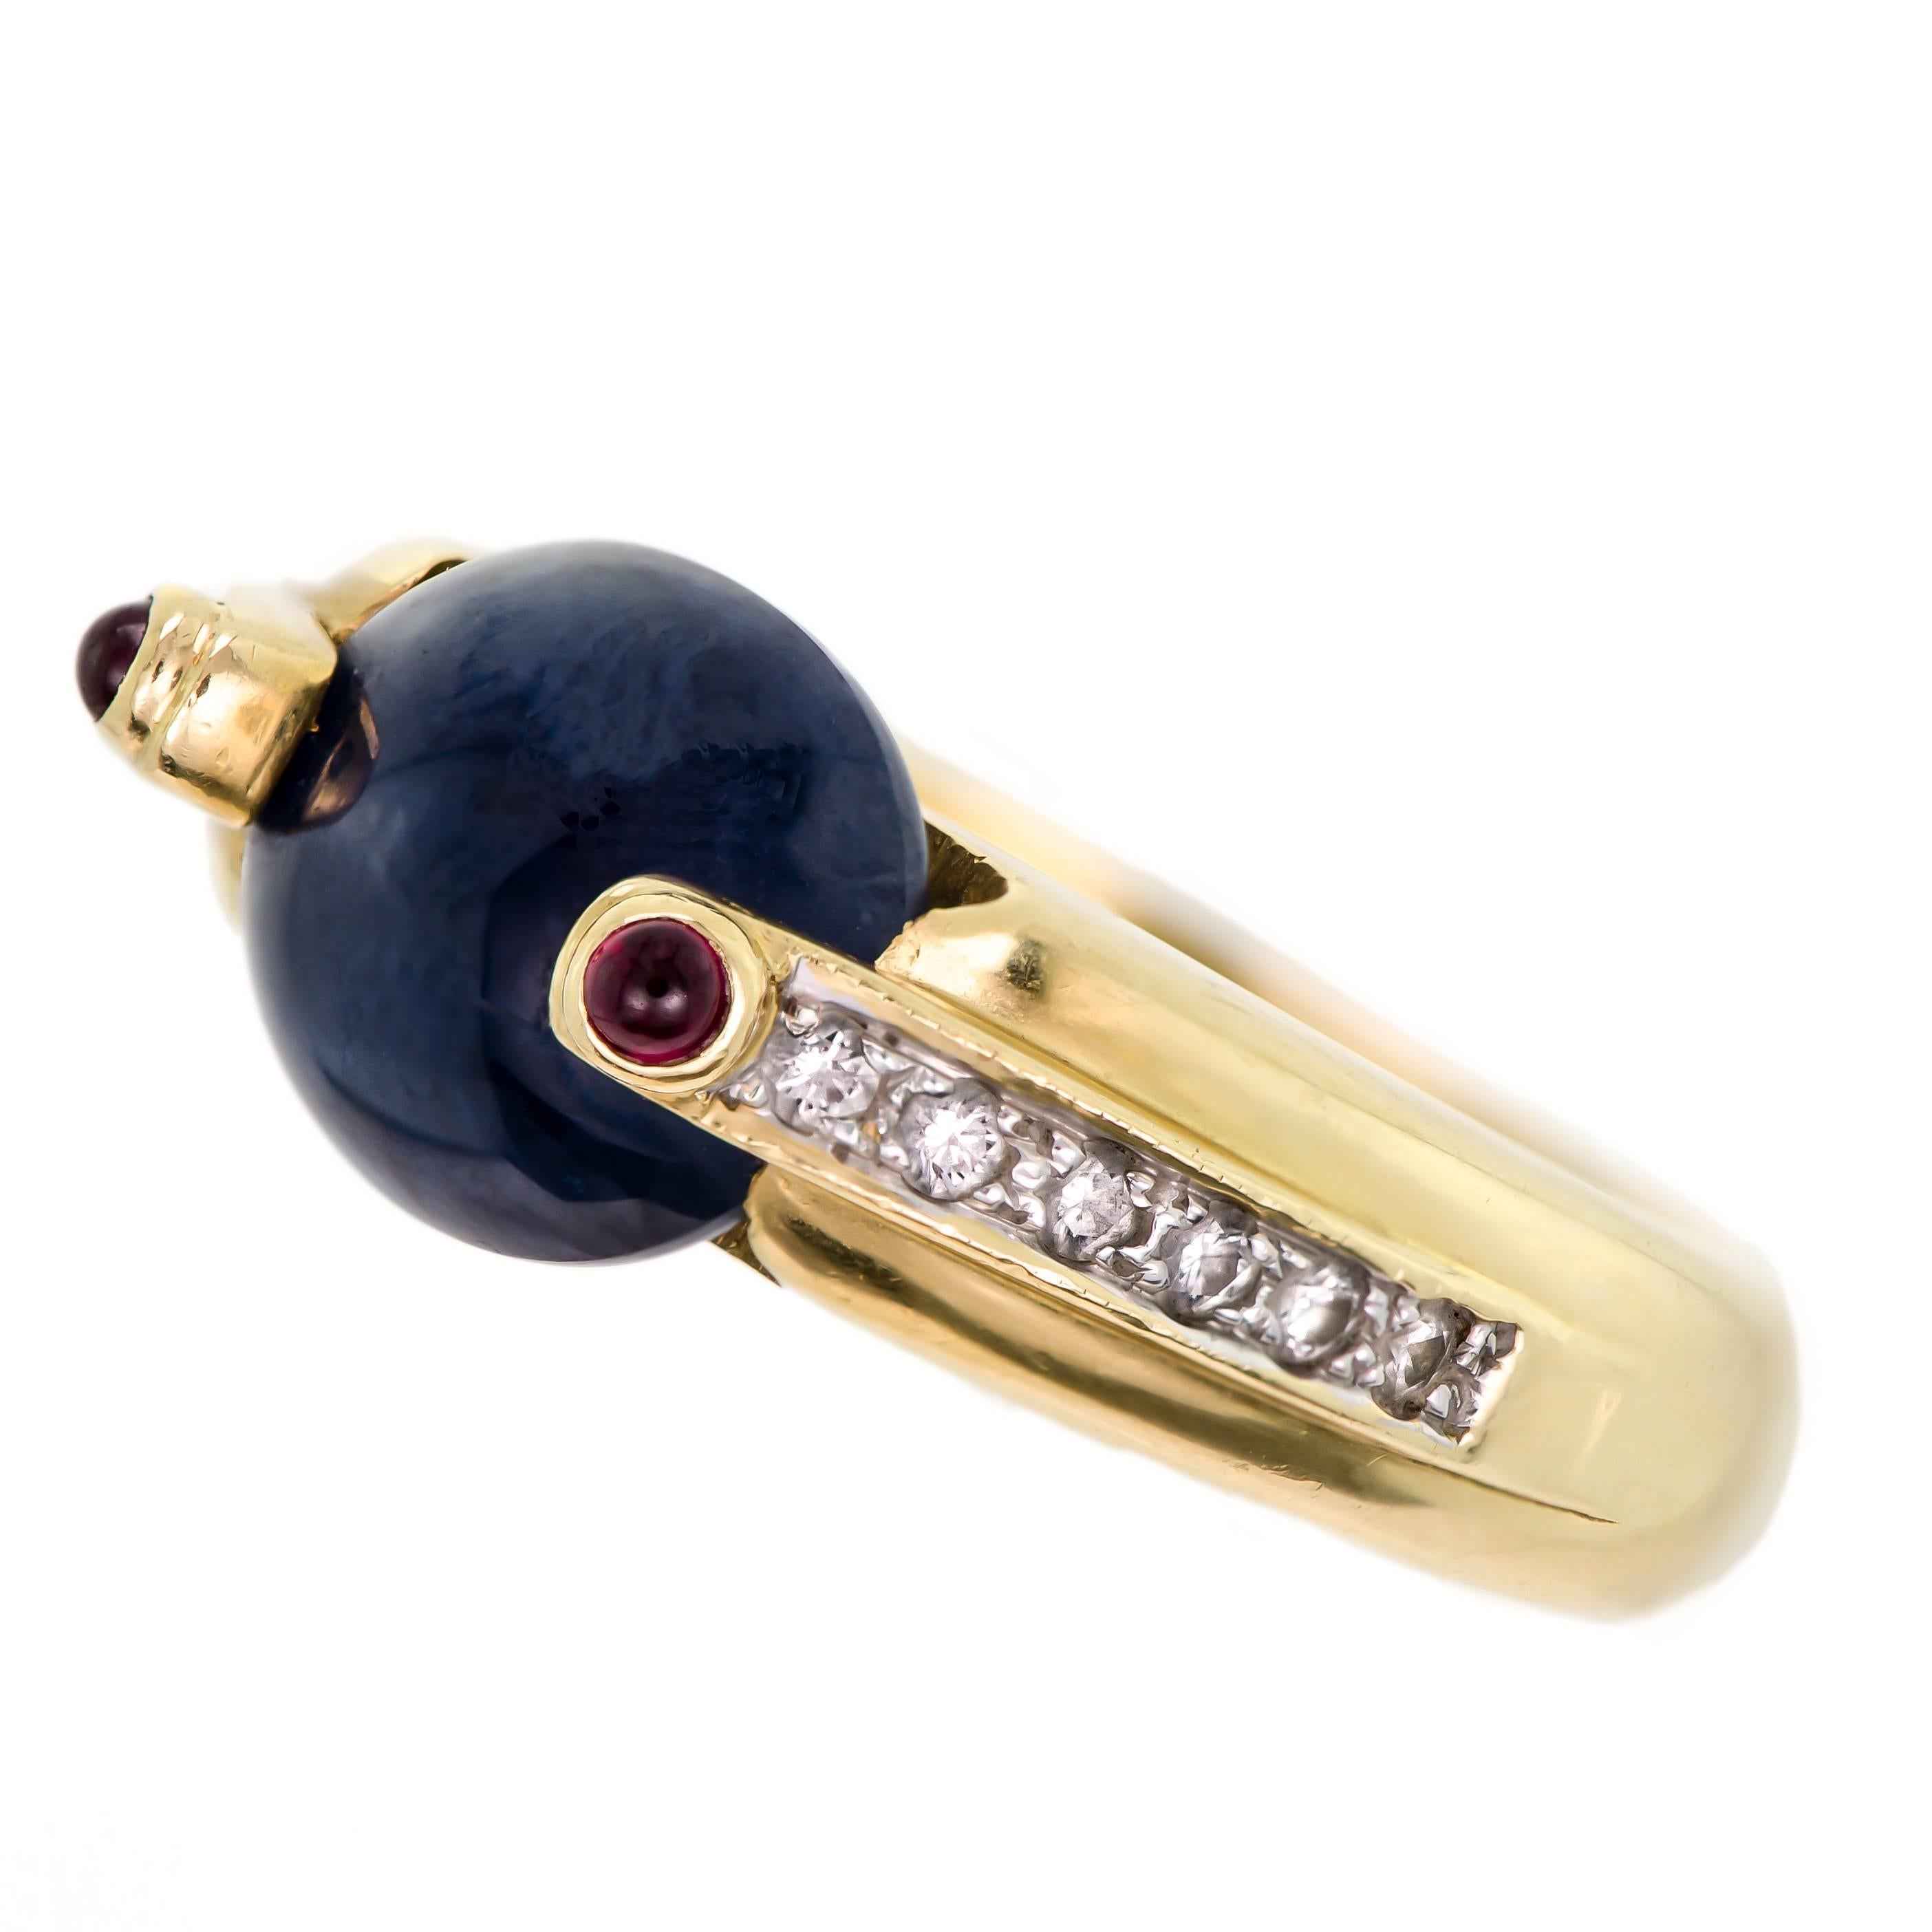 Contemporary 18kt (750 stamp) yellow gold, European sapphire, diamond, and ruby ring containing one (1) oval sapphire cabochon set lengthwise measuring approximately 11mm by 9.5mm accented by twelve (12) (6 each side) small brilliant cut diamond and